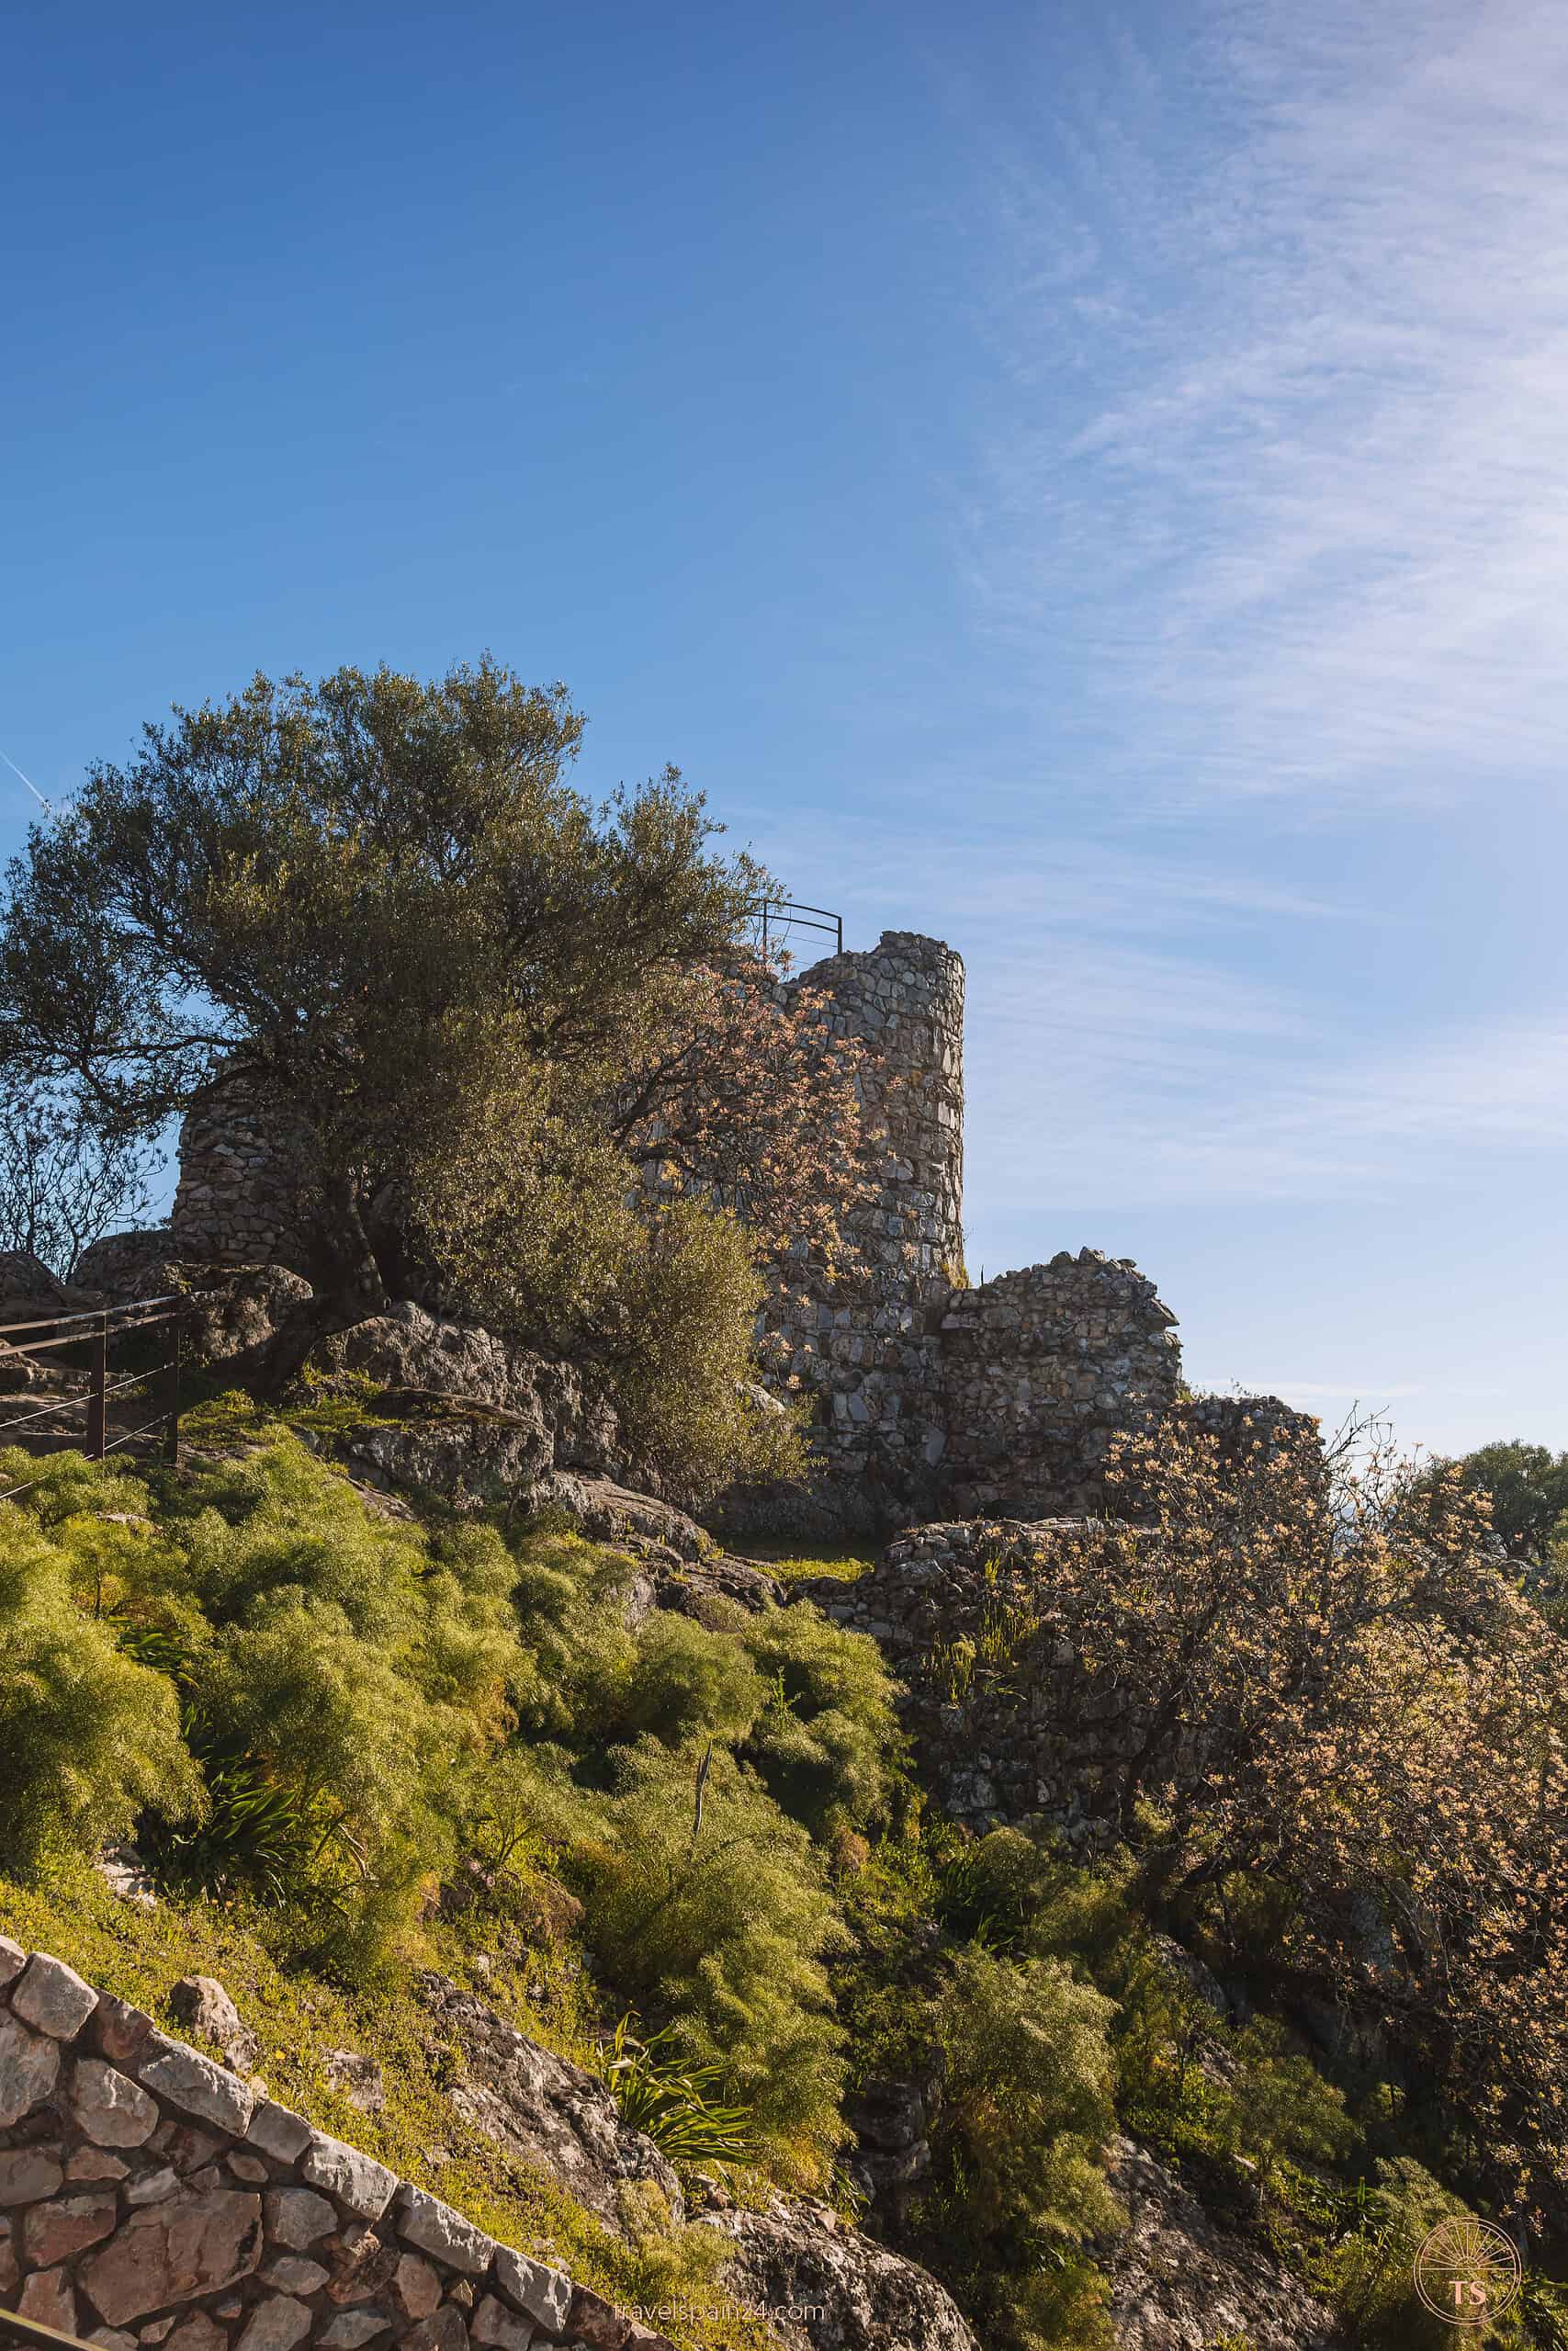 Ruins of the ancient castle atop a hill in Monfragüe National Park, providing expansive views over the landscape.